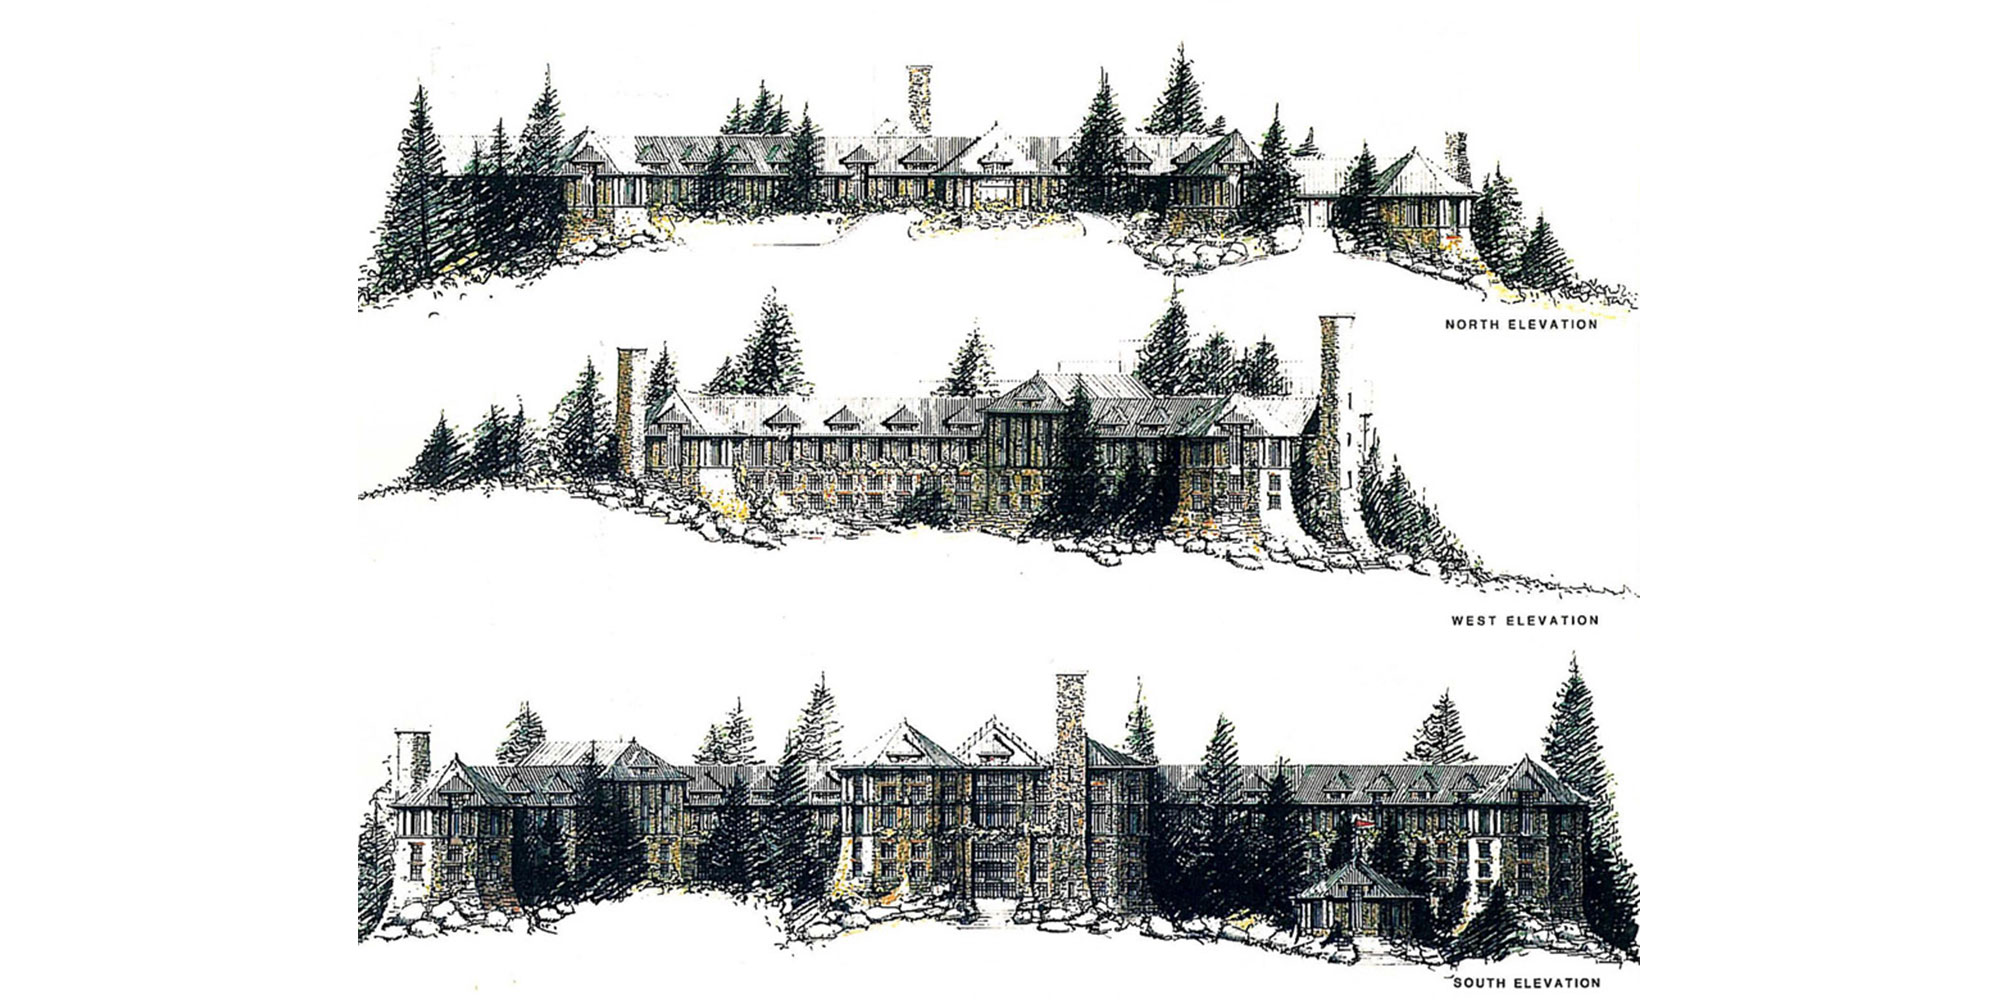 Castle Pines Hotel elevations